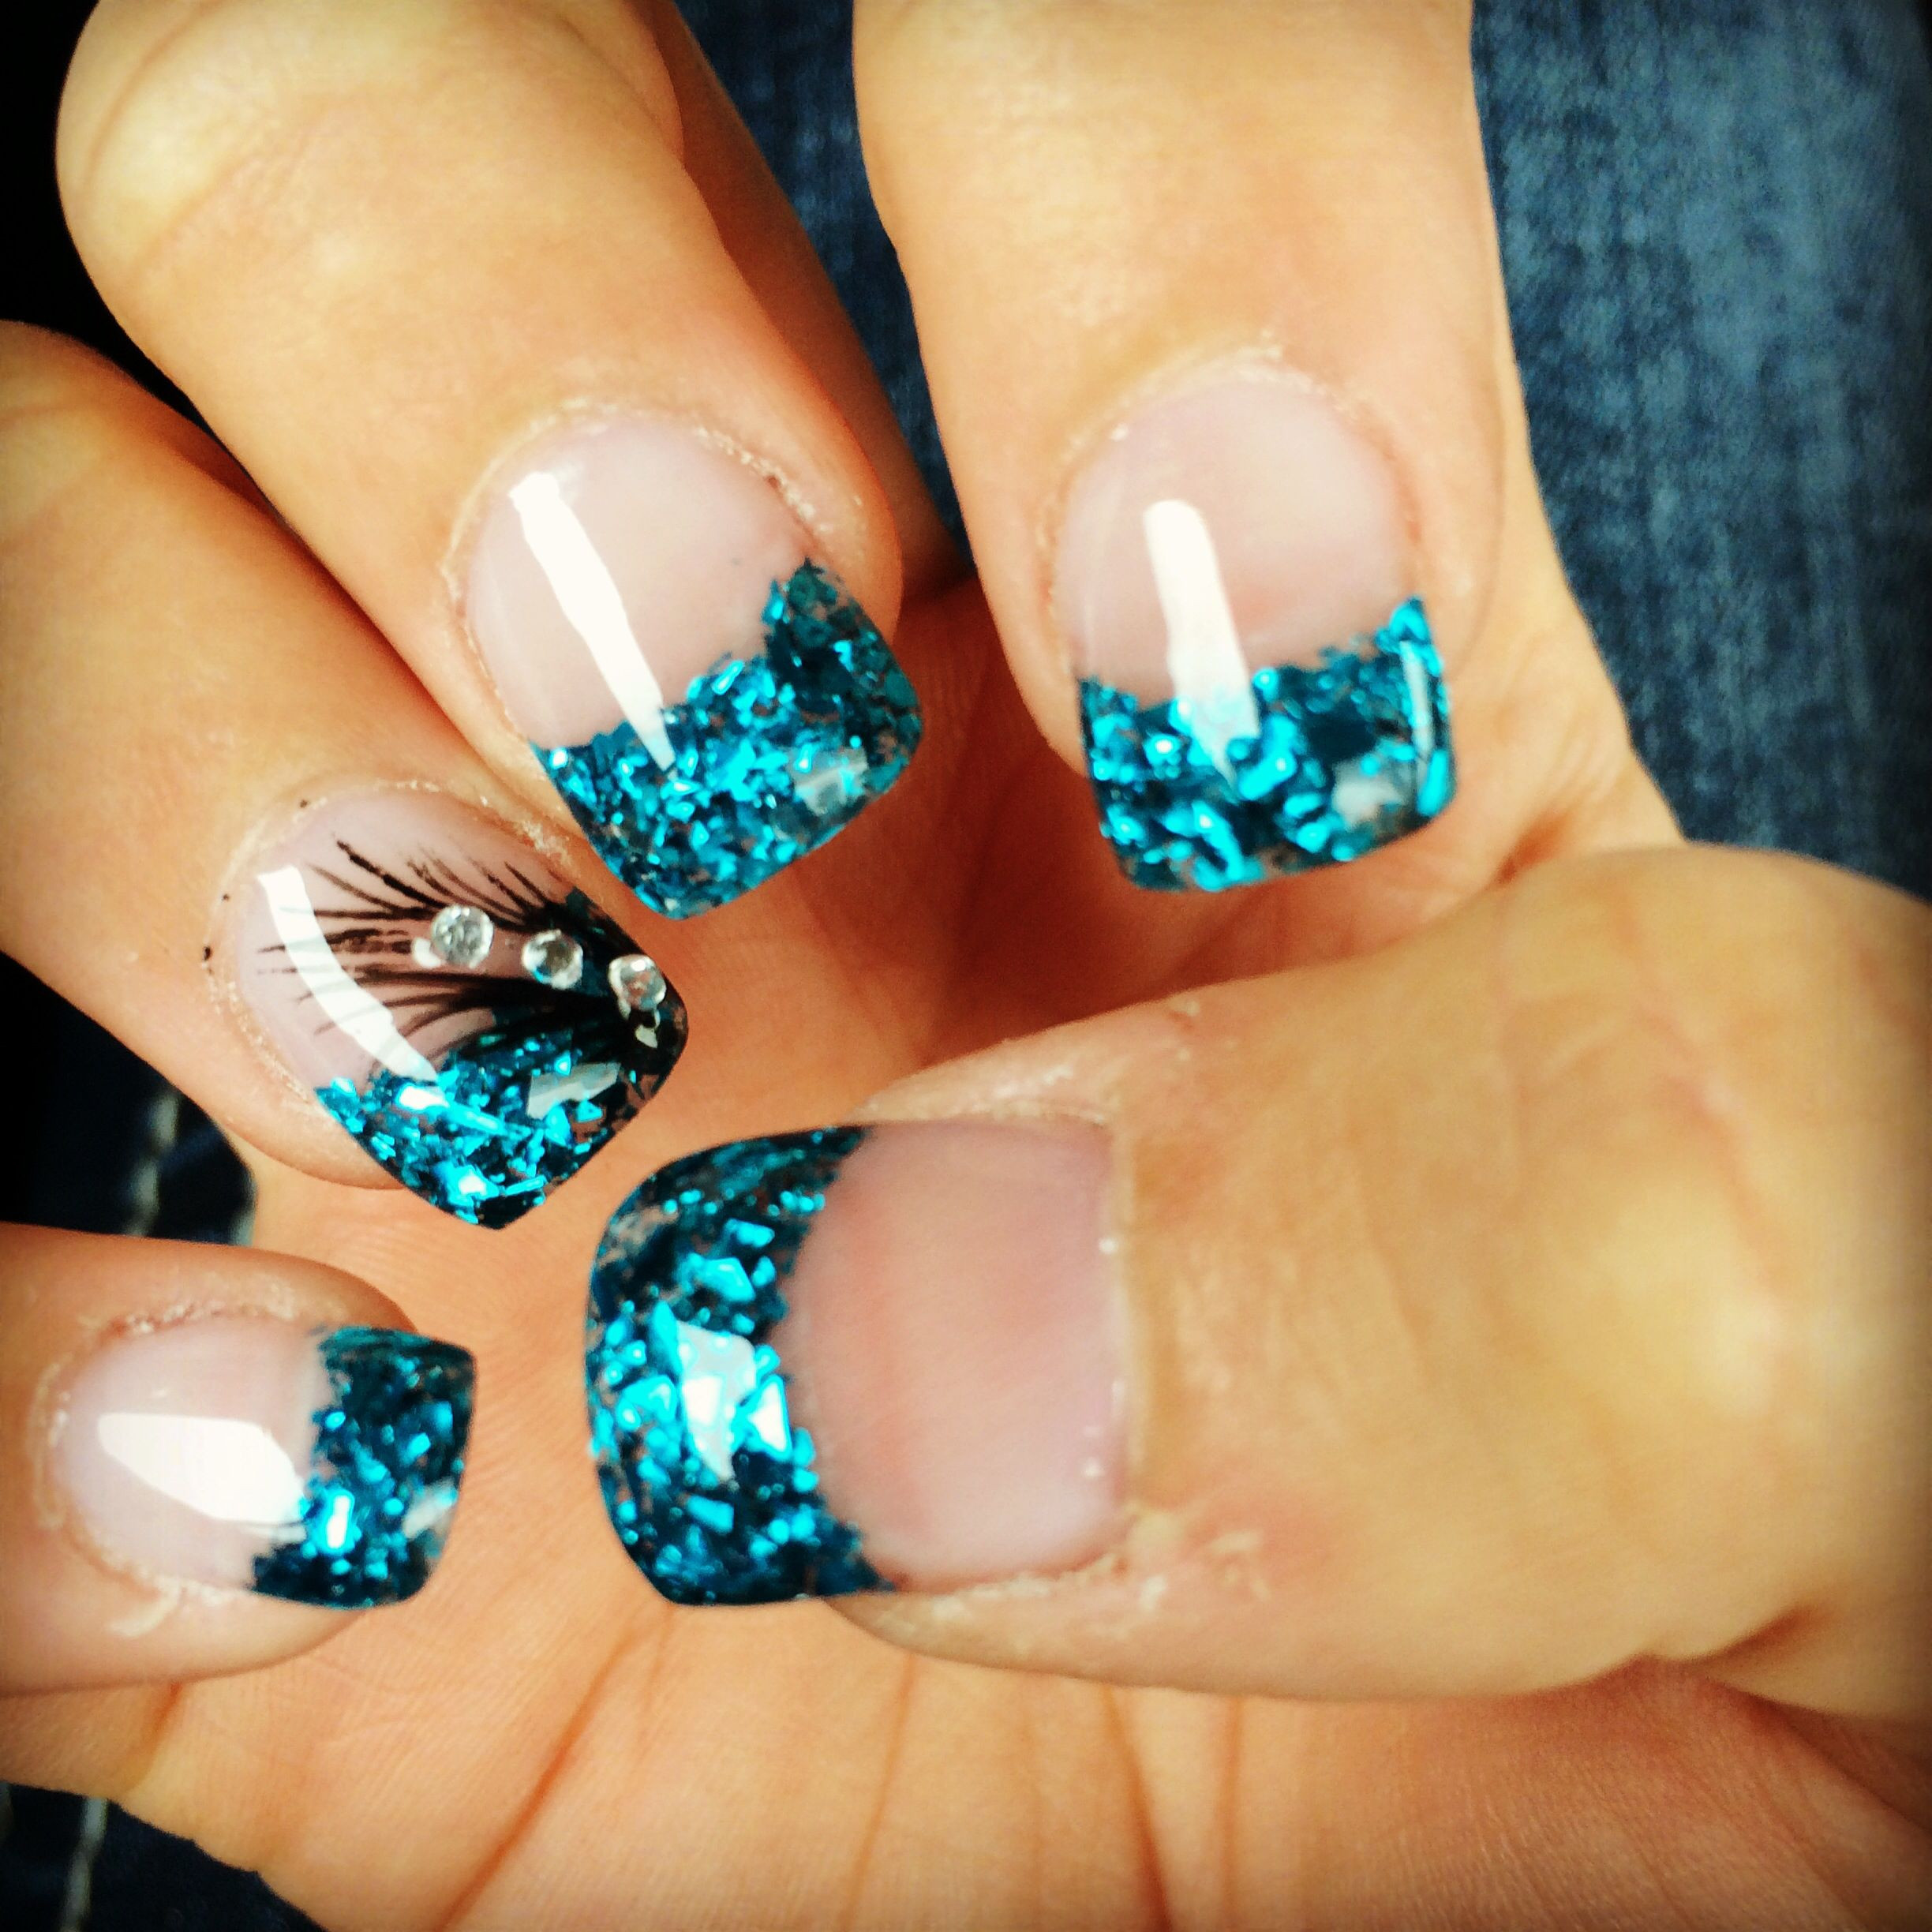 Colored Acrylic Nail Designs
 Colored Acrylic tips with a feather design